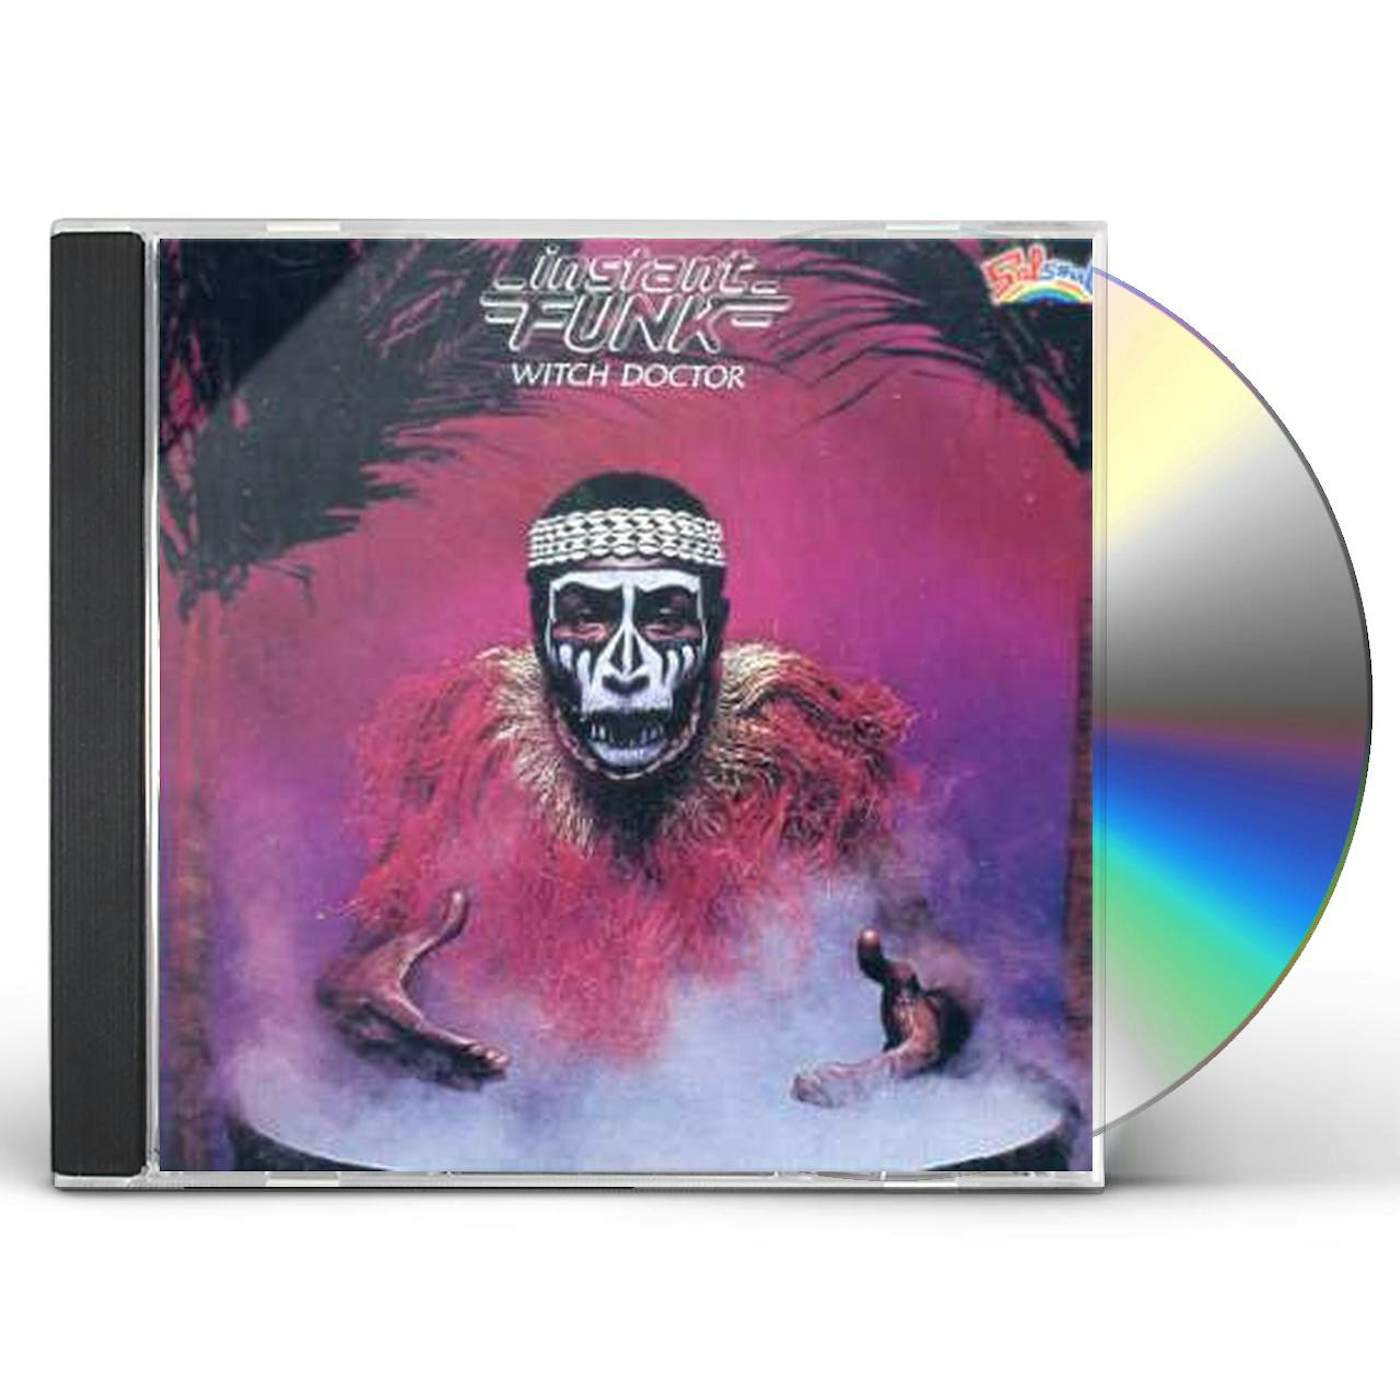 Instant Funk WITCH DOCTOR CD